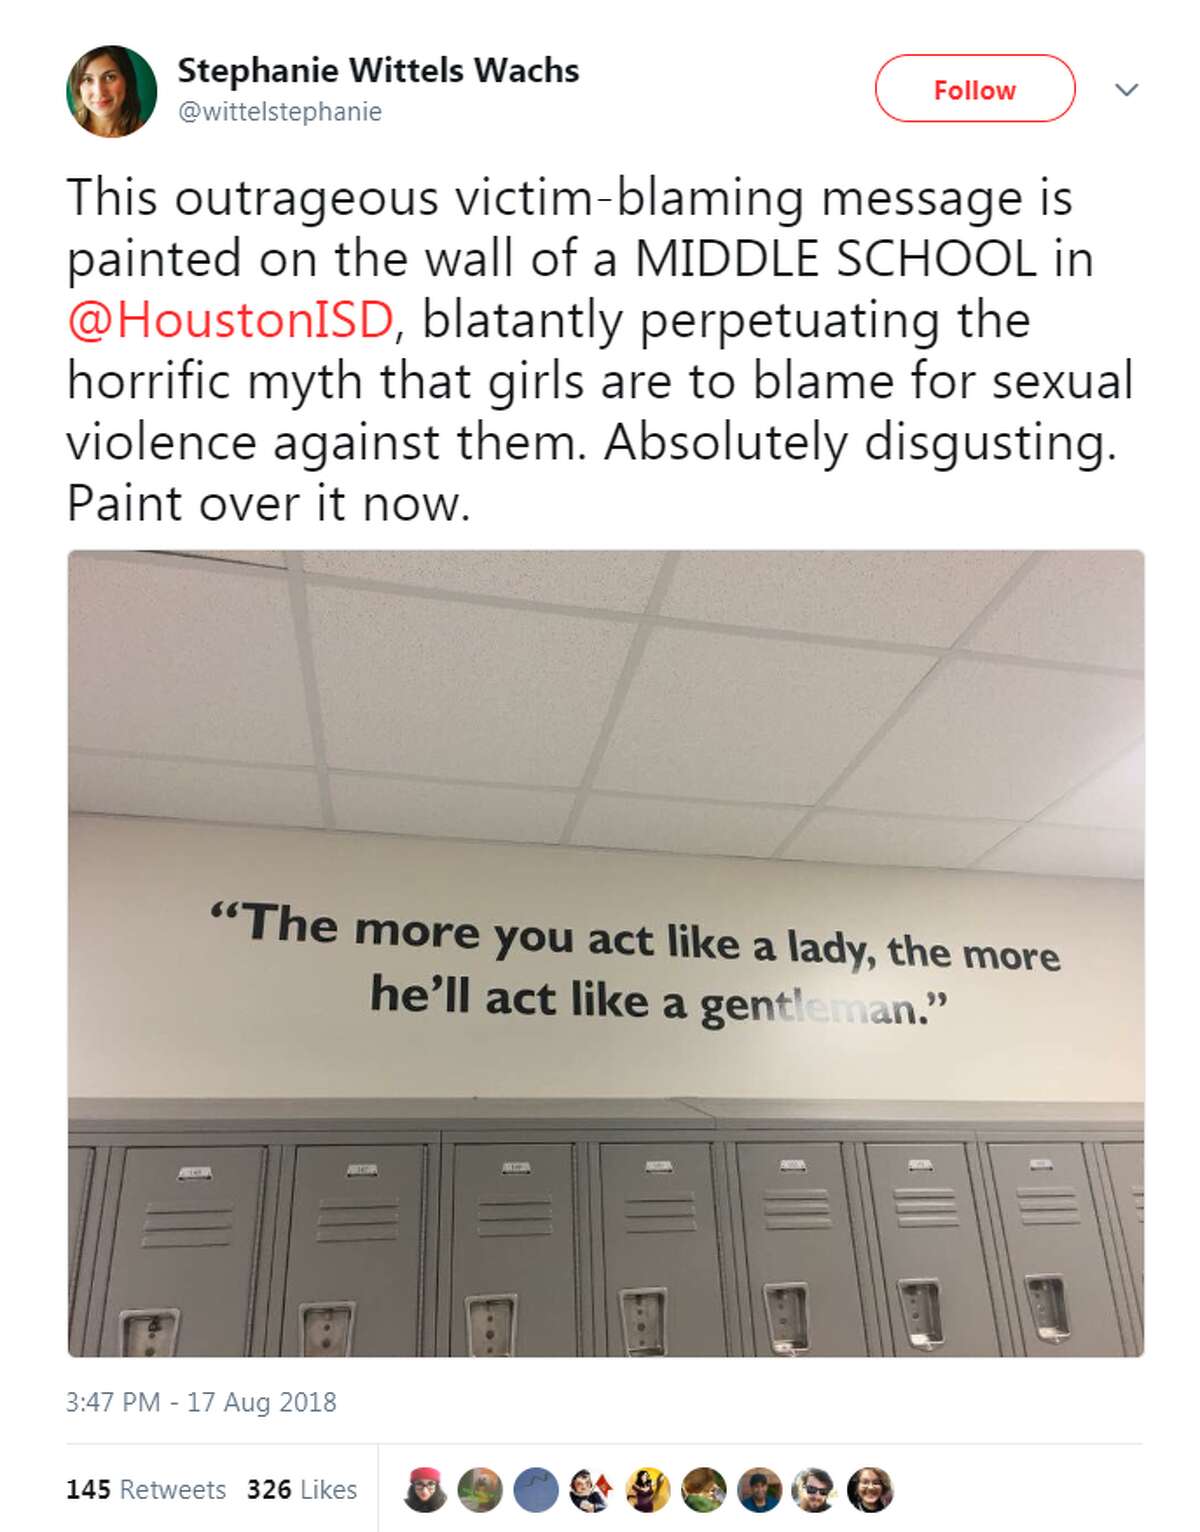 Houston ISD school Gregory Lincoln is drawing criticism online for featuring the following quote in its hallway: "The more you act like a lady, the more he'll act like a gentleman."